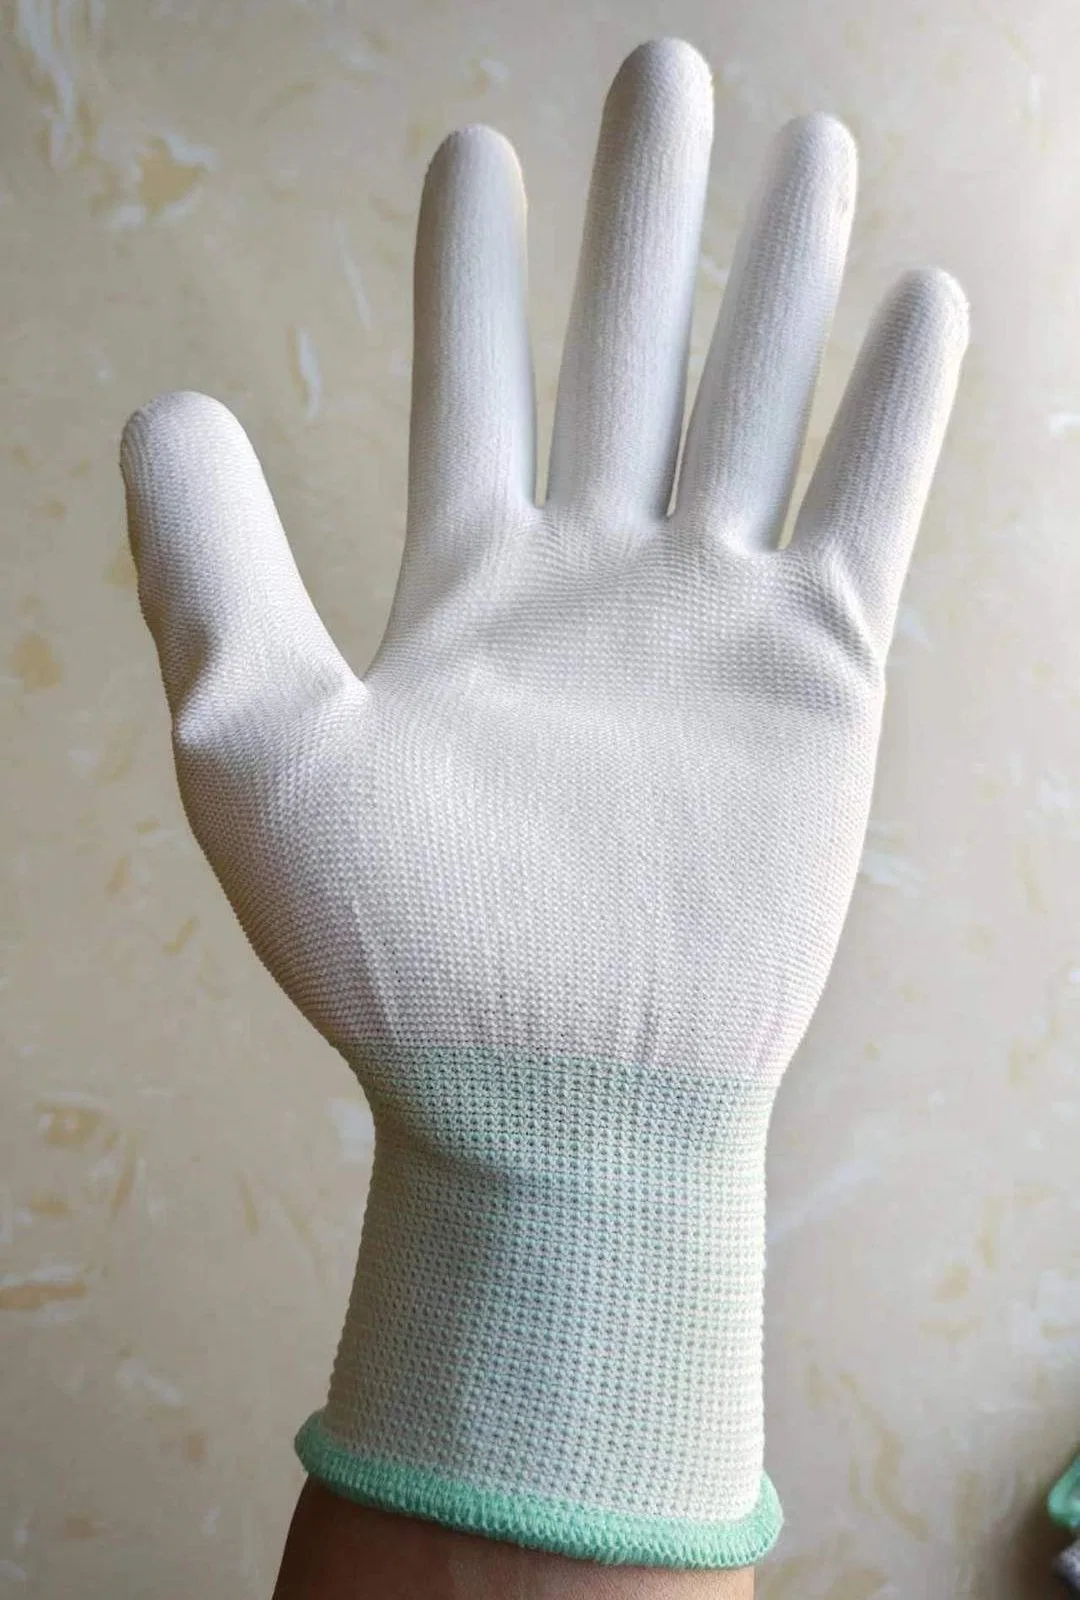 Summer Style White Lightweight Knitted Nylon PU DIP Coated Palm Work Gloves